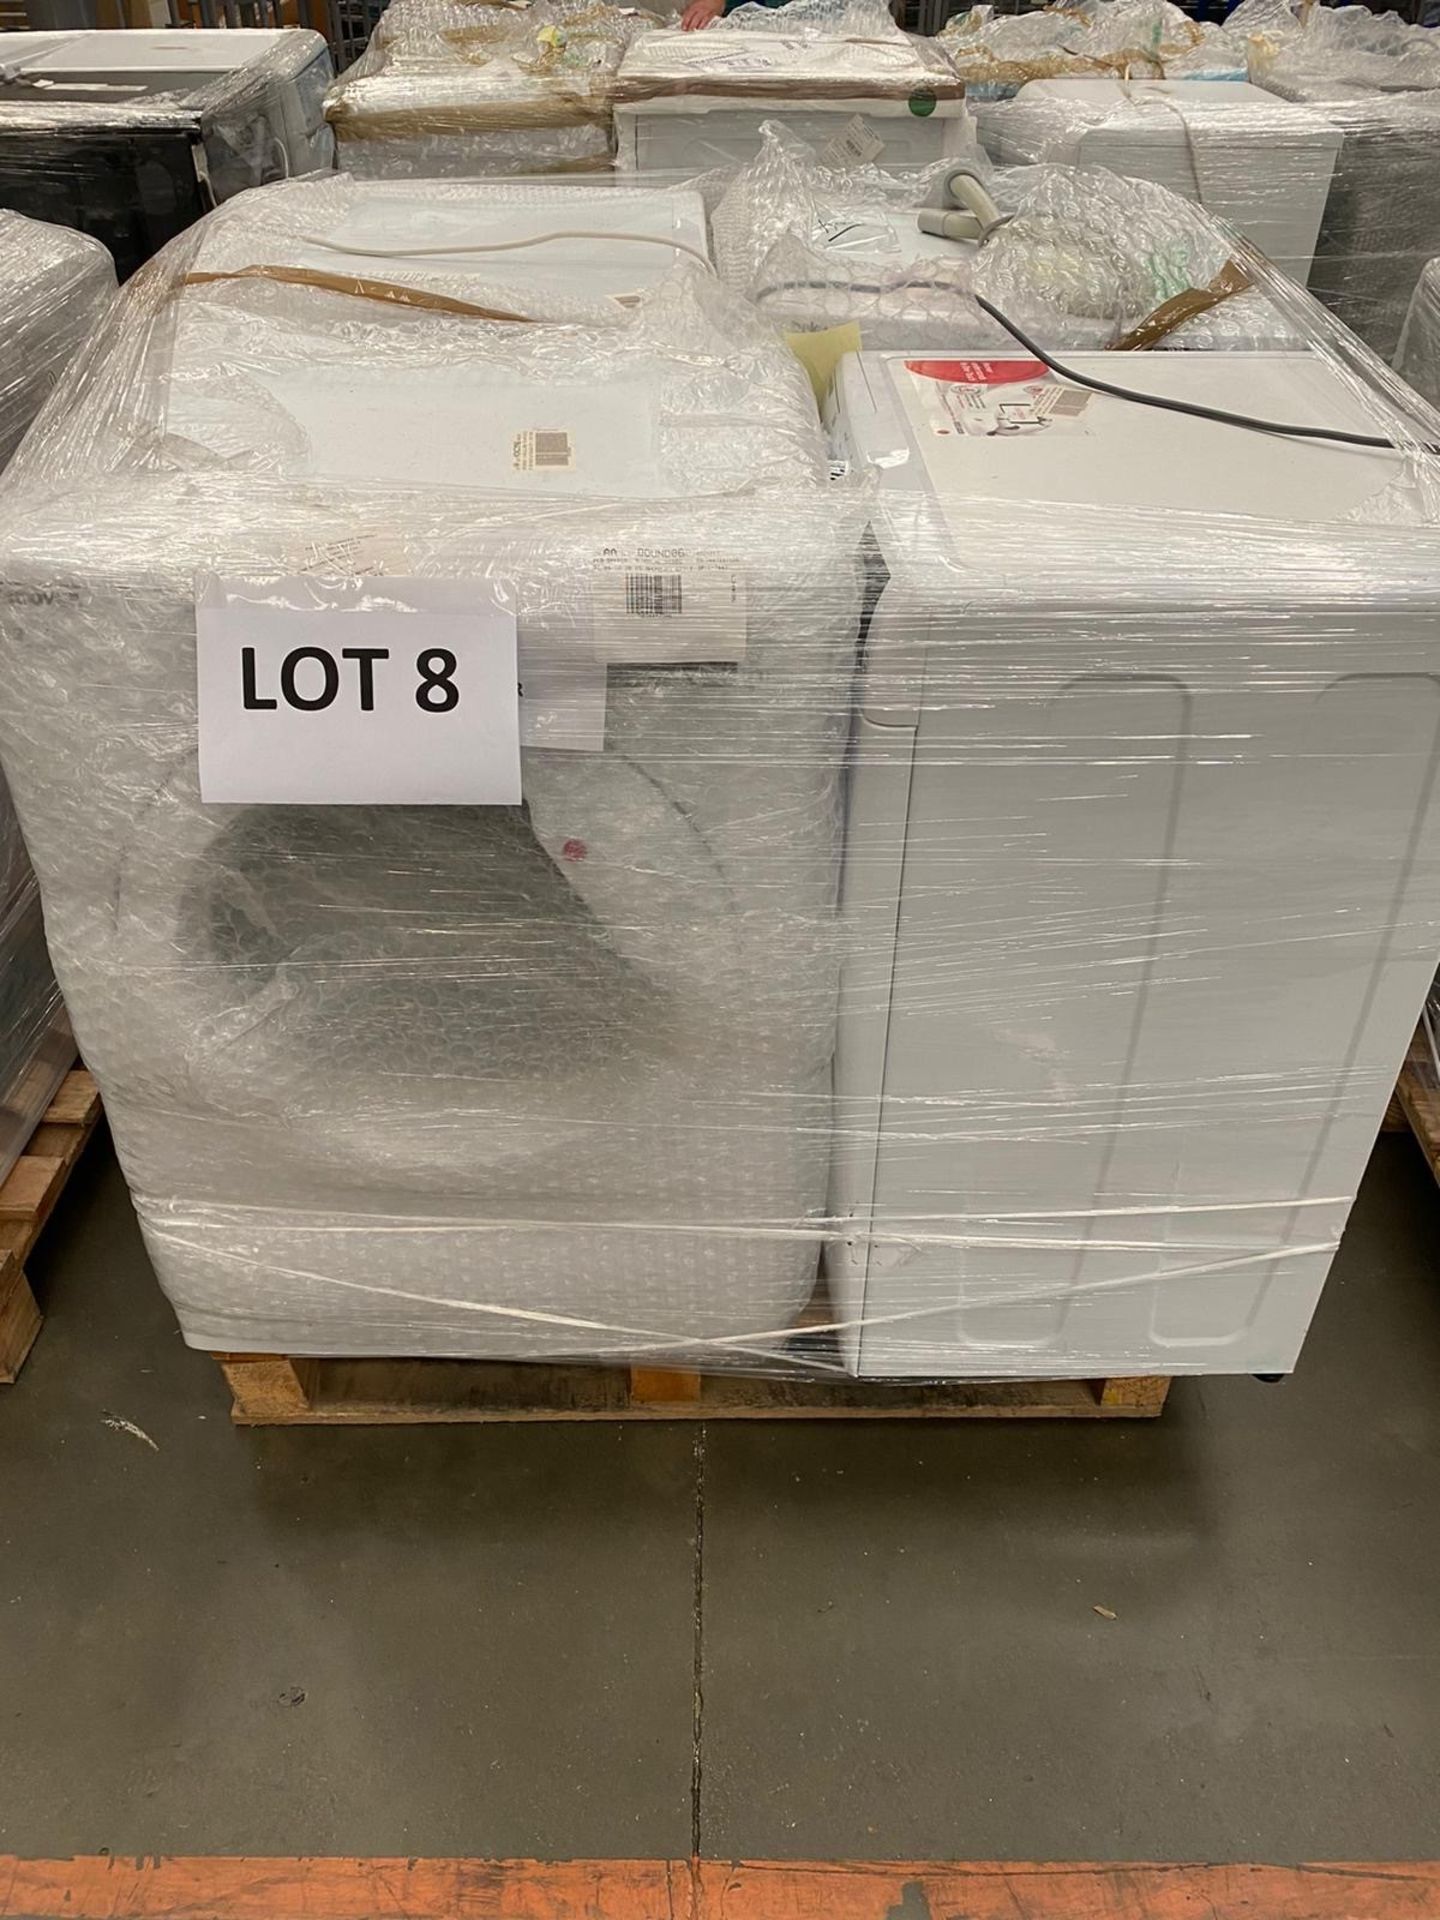 5 Pallets of mixed laundry white goods. Brands Miele, Indesit, Beko, LG. - Image 9 of 9